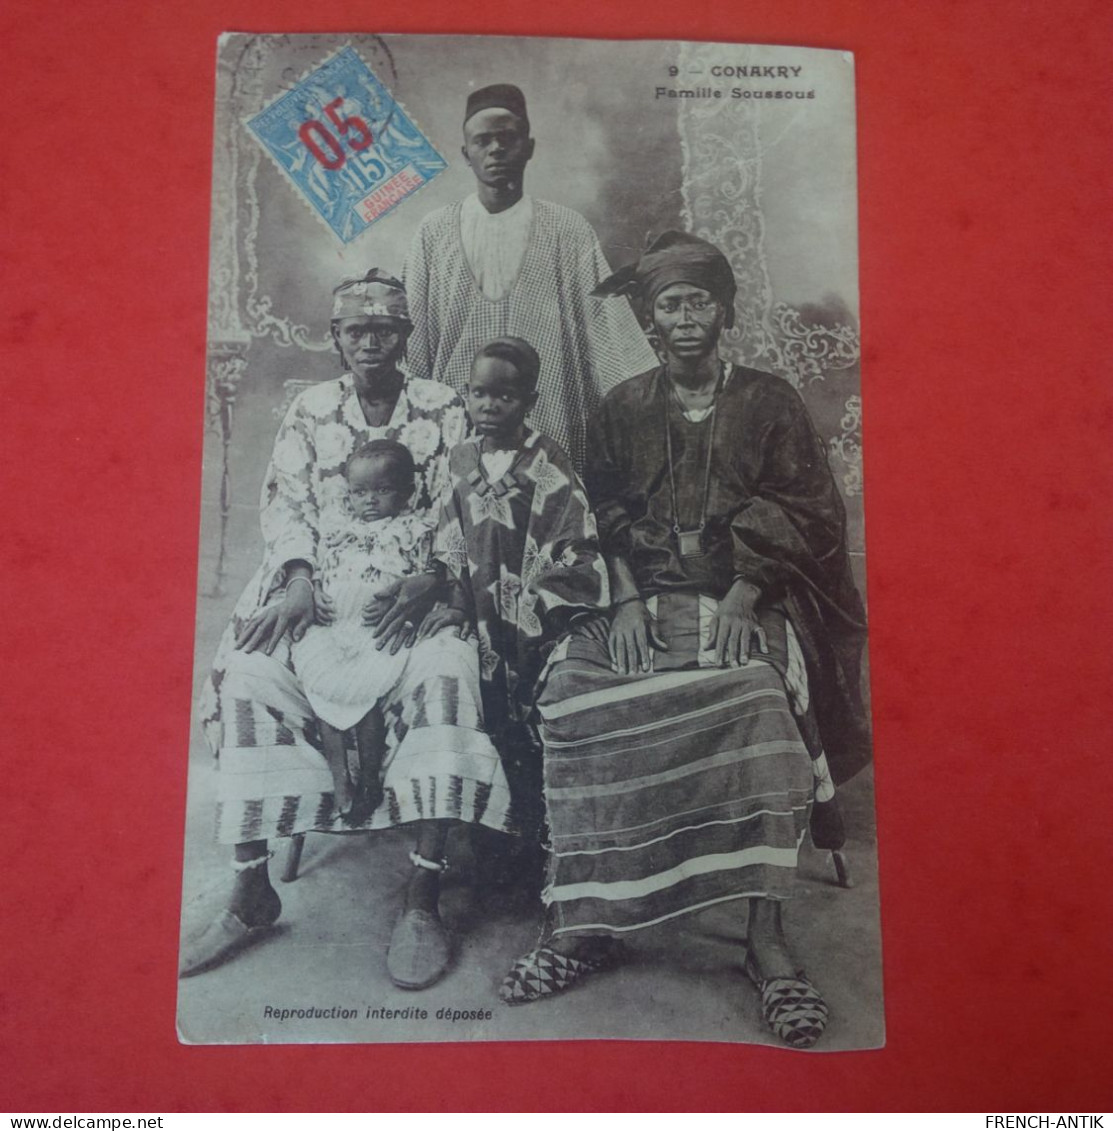 CONAKRY FAMILLE SOUSSOUS - French Guinea